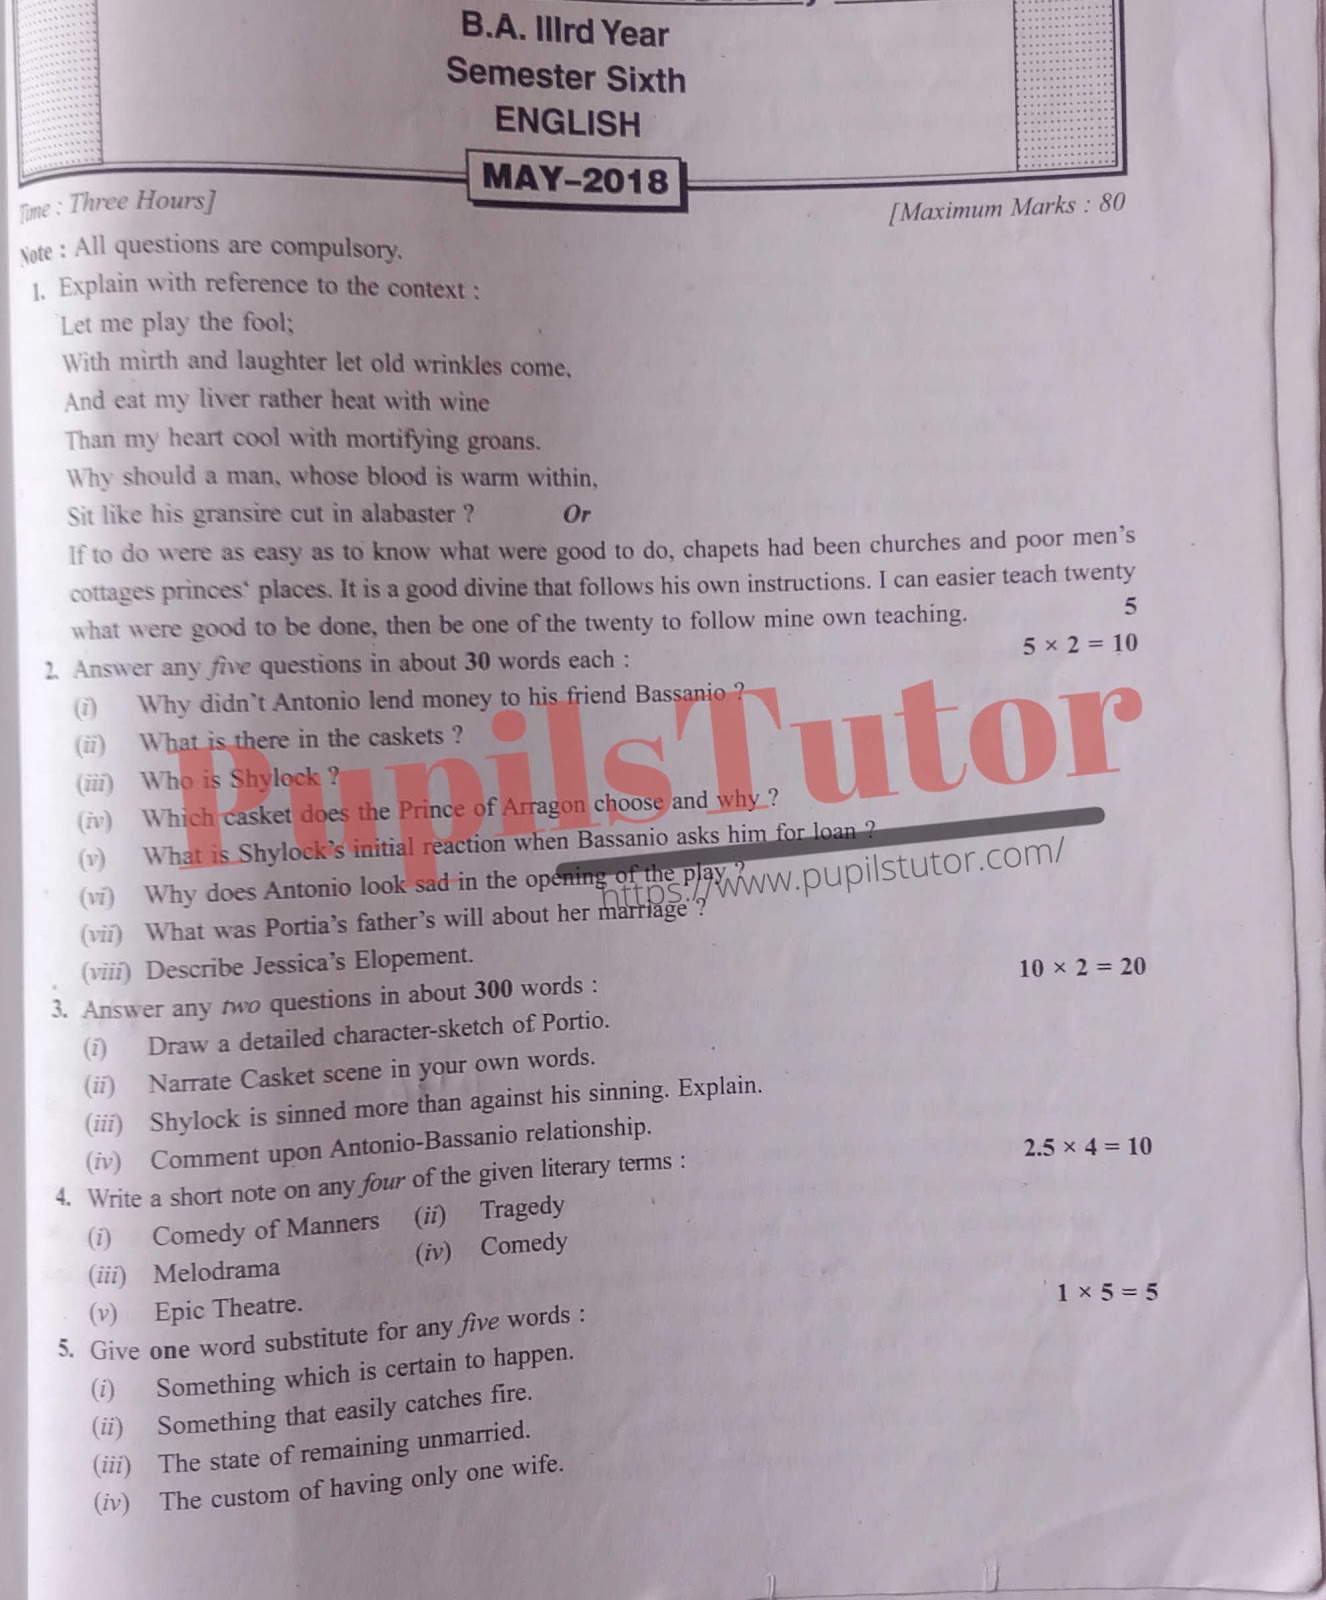 CDLU (Chaudhary Devi Lal University, Sirsa Haryana) BA Semester Exam Sixth Semester Previous Year English Question Paper For May, 2018 Exam (Question Paper Page 1) - pupilstutor.com